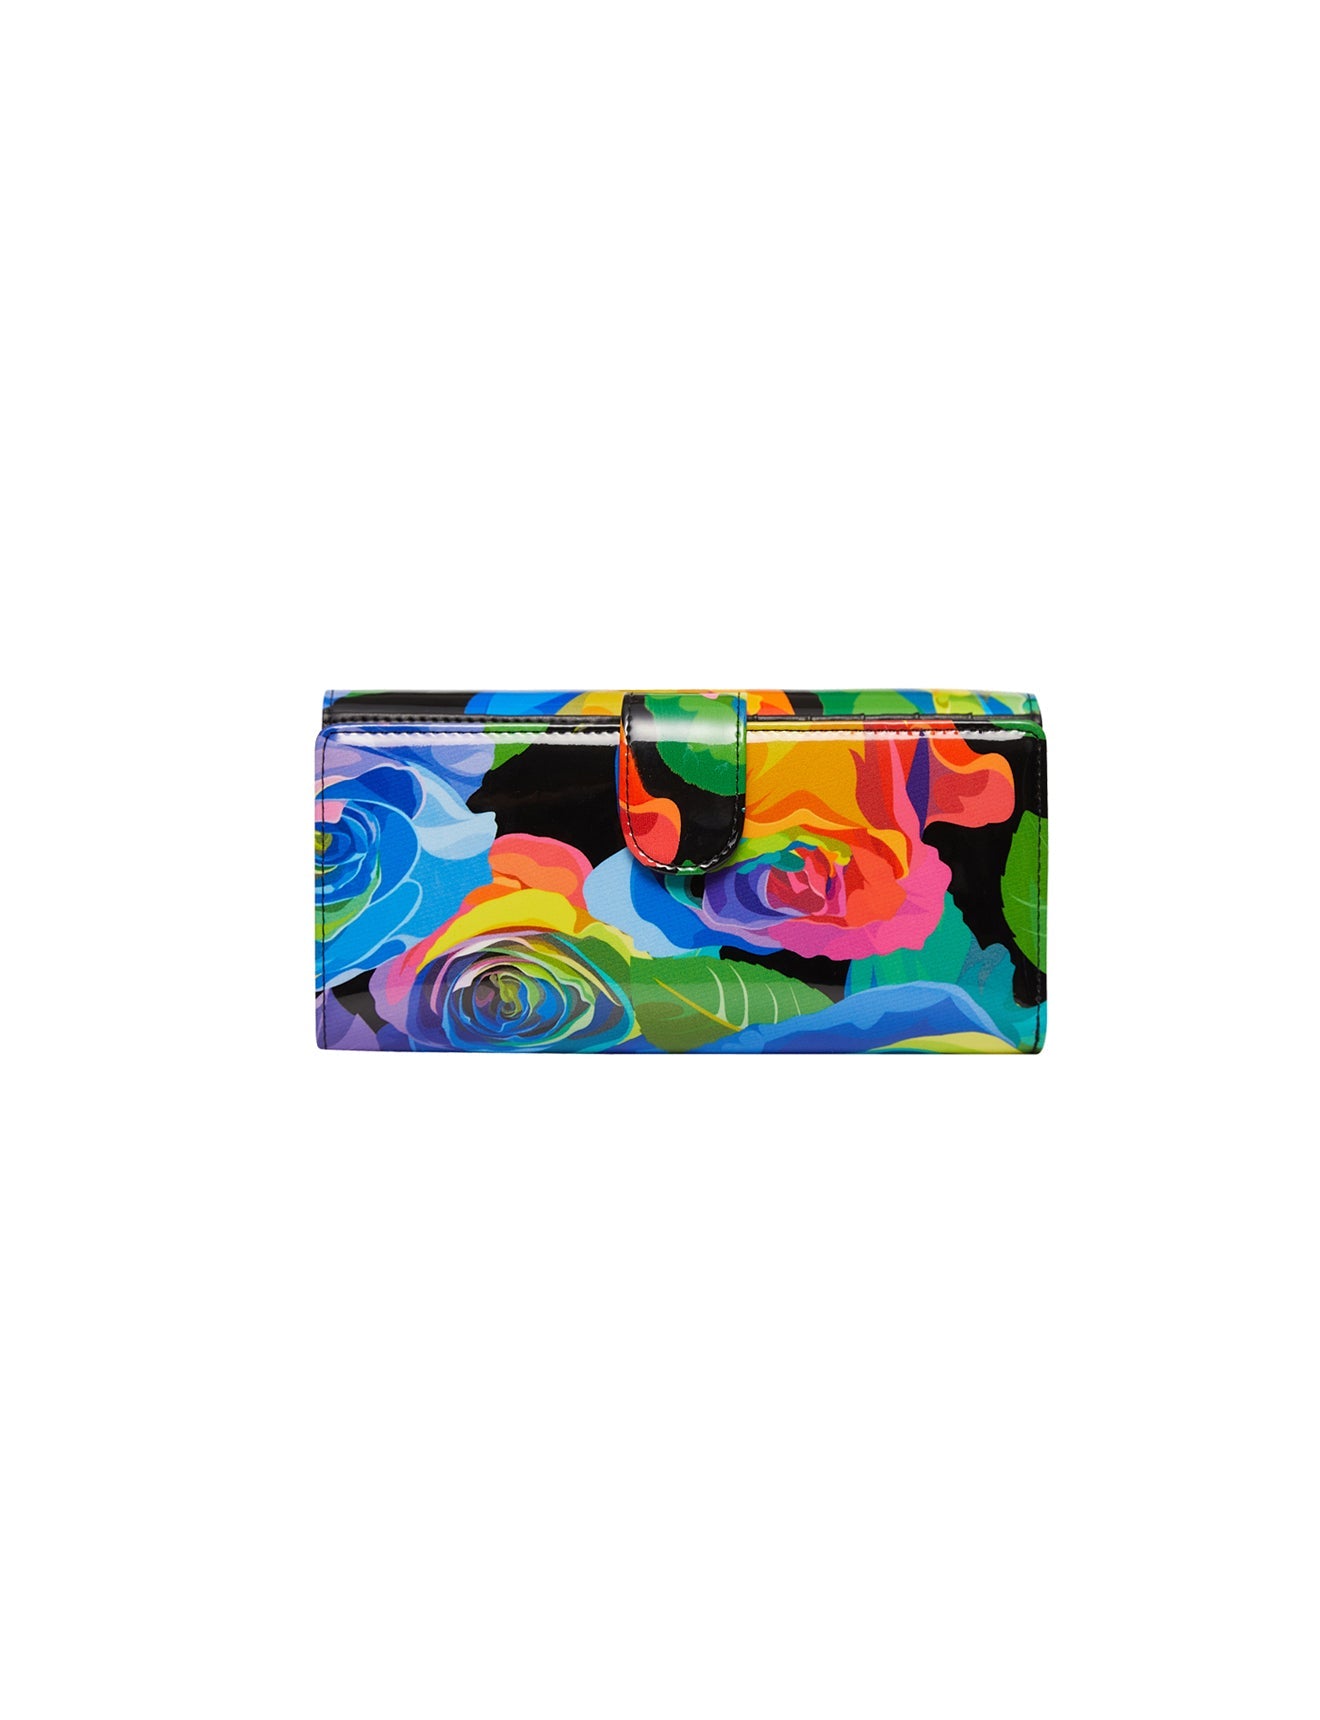 Serenade - Rainbow Rose WSN-3601 Leather Wallet - Large - 0